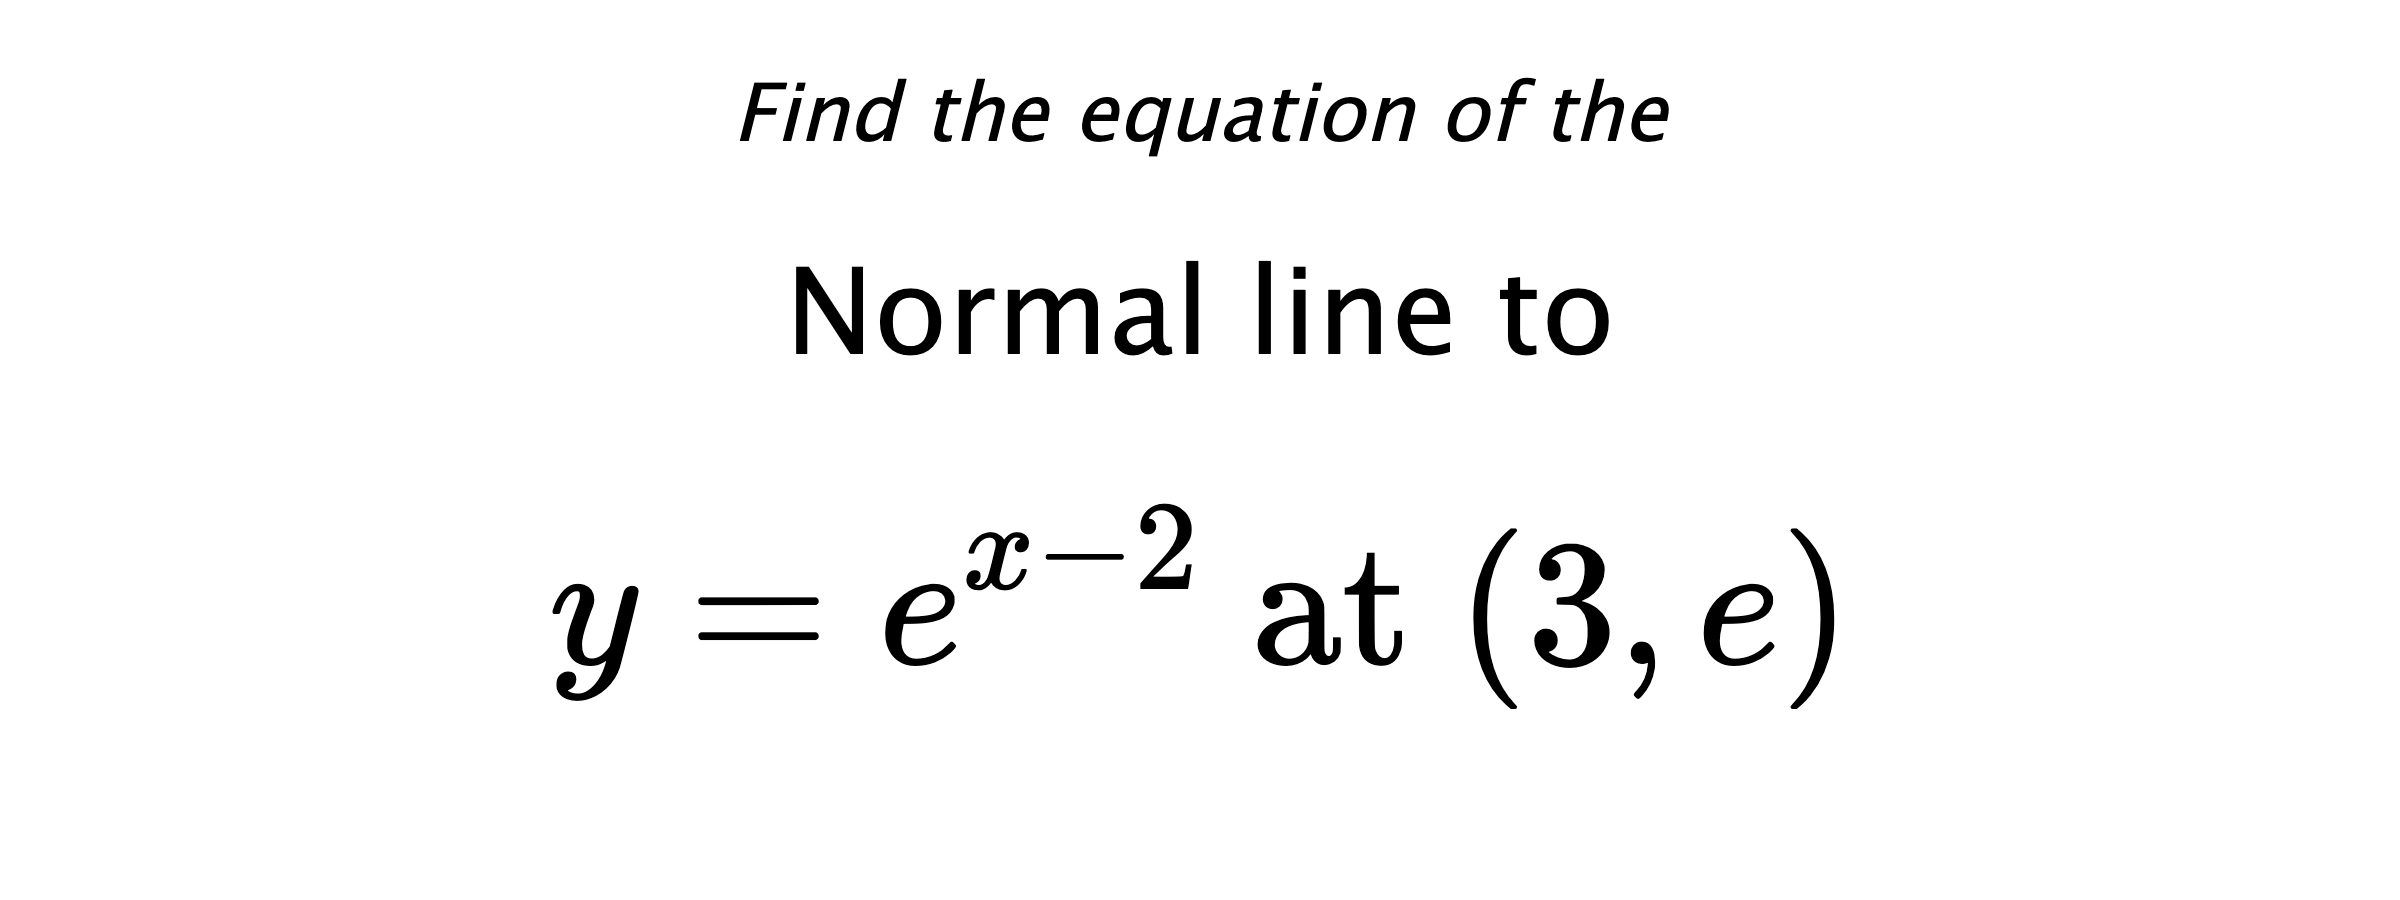 Find the equation of the Normal line to $$ y=e^{x-2} \text{ at } (3,e) $$